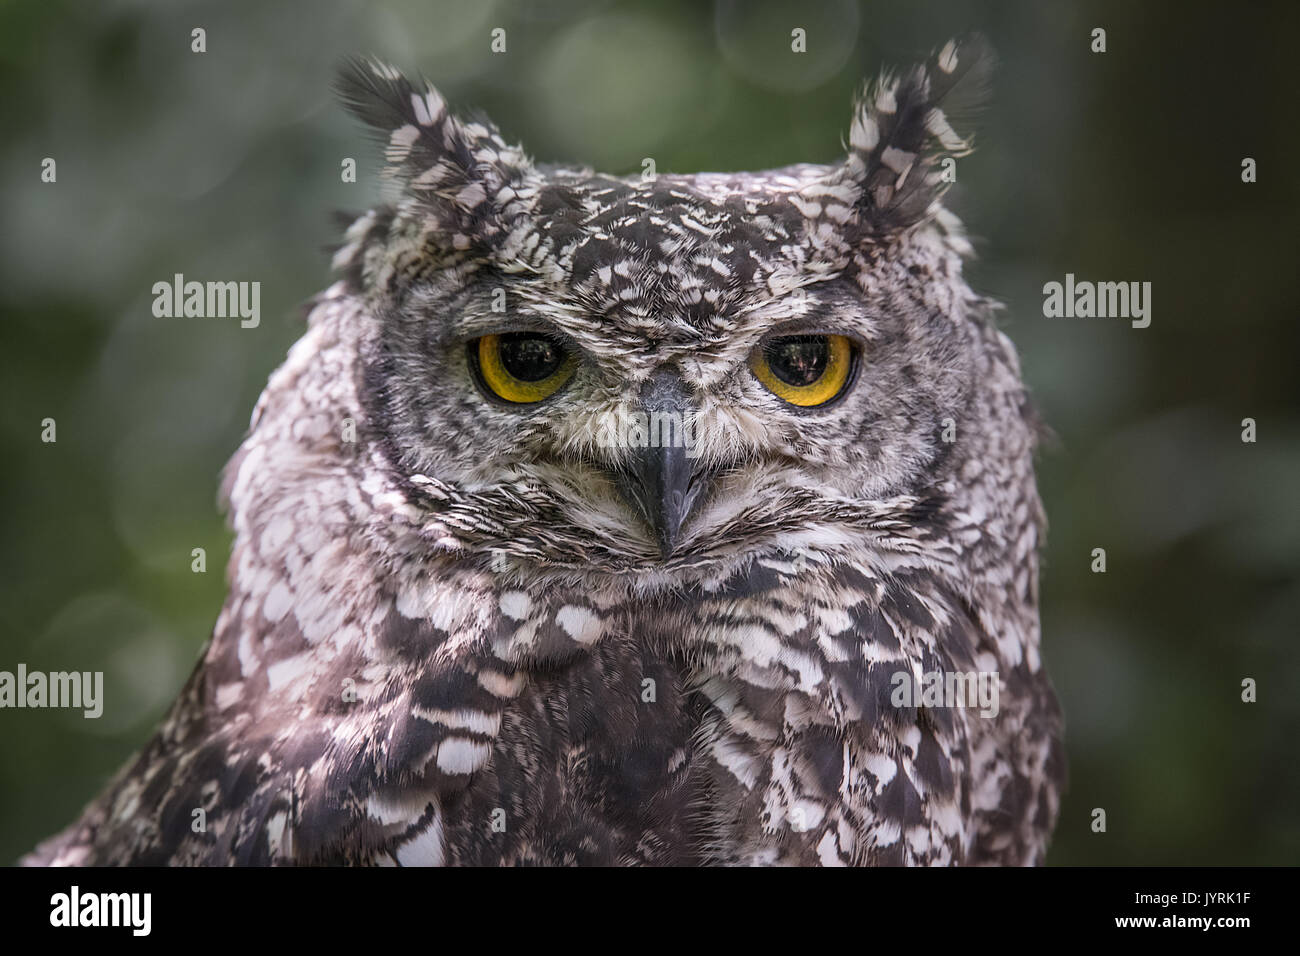 Close up head portrait photograph of an African spotted owl Bubo africanus staring directly forward at the camera Stock Photo